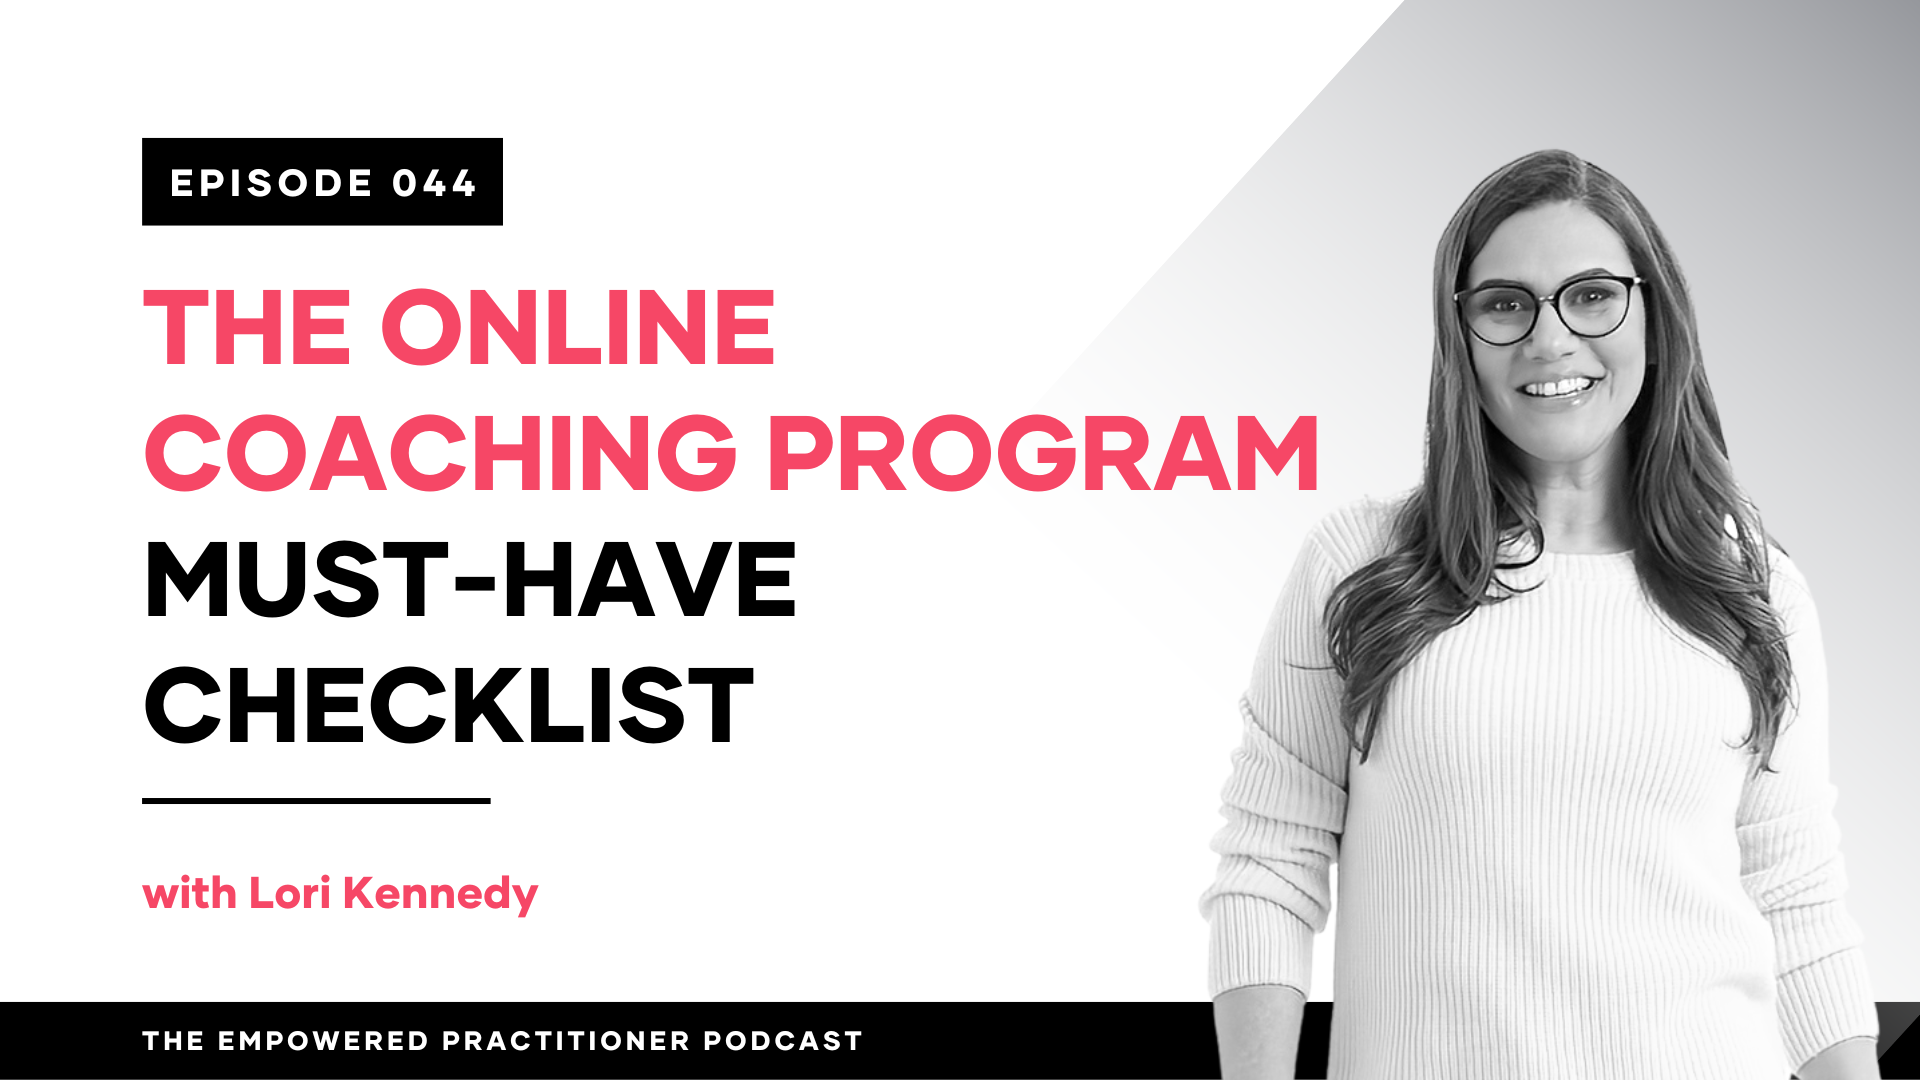 The Online Coaching Program Must Have Checklist